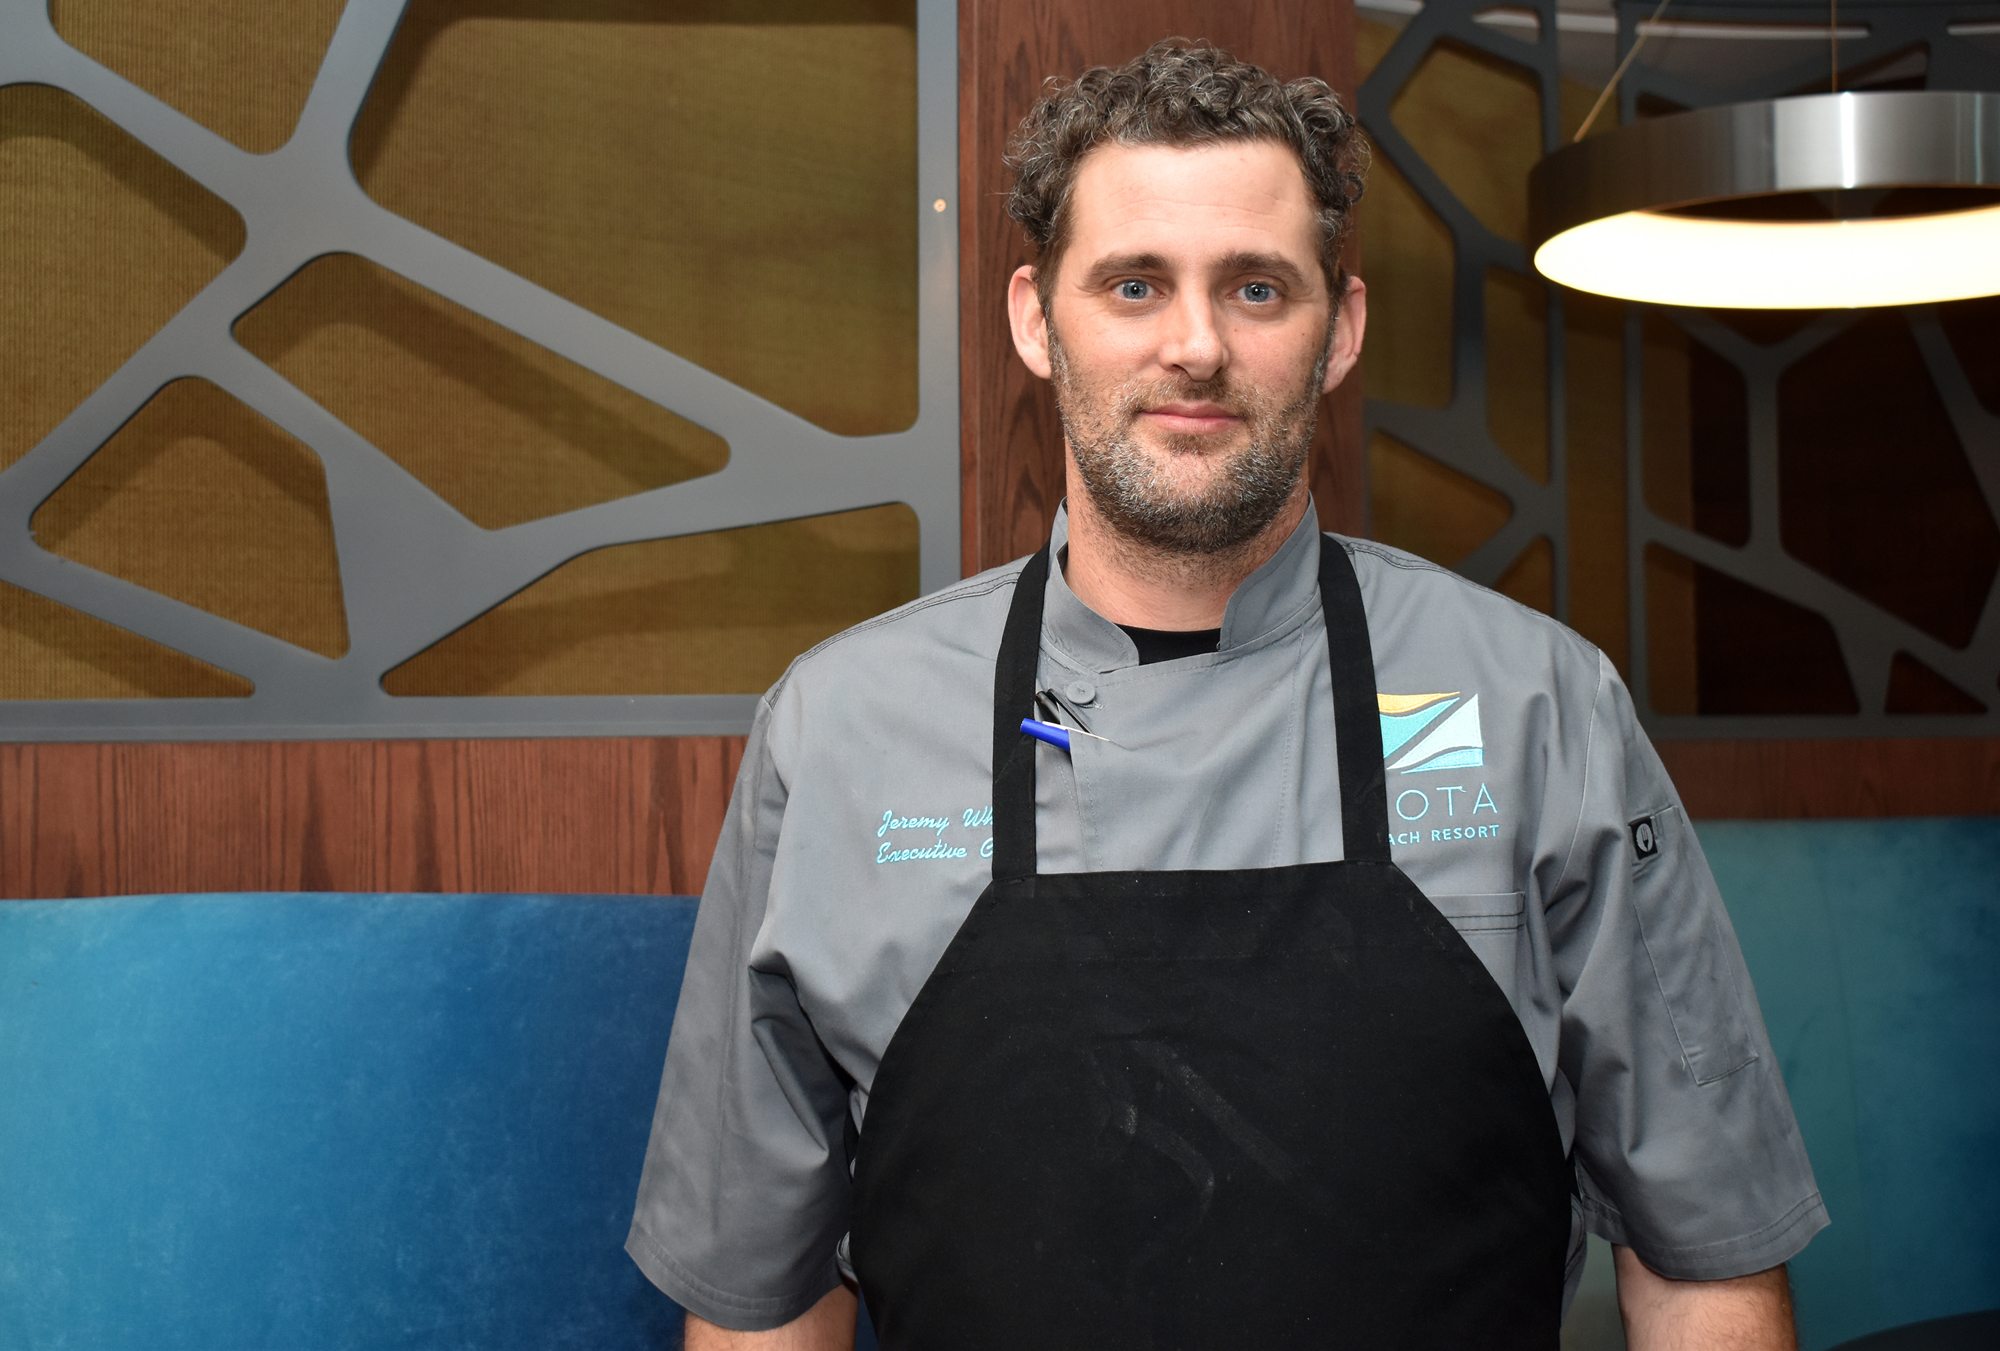 Viento Executive Chef Jeremy White said he wants Viento to become a regular spot for Sarasota, Longboat Key and Bradenton residents.